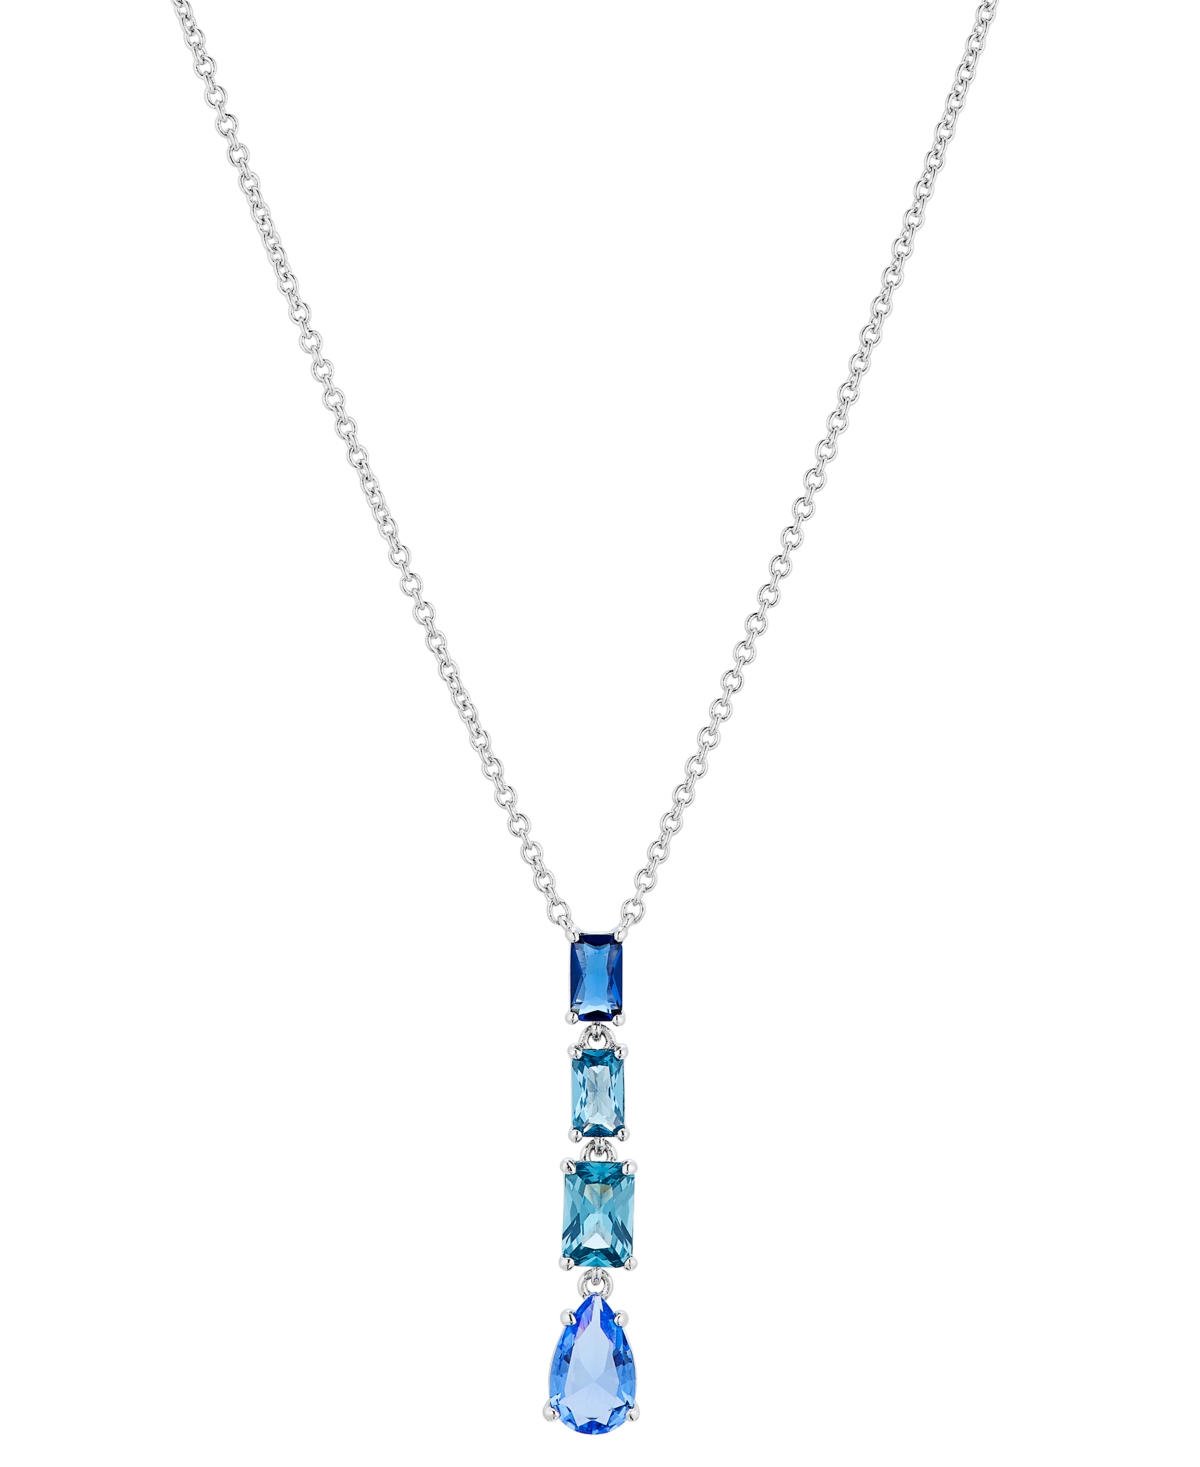 Eliot Danori Silver-tone Mixed Stone Lariat Necklace, 16" + 2" Extender, Created For Macy's In Blue